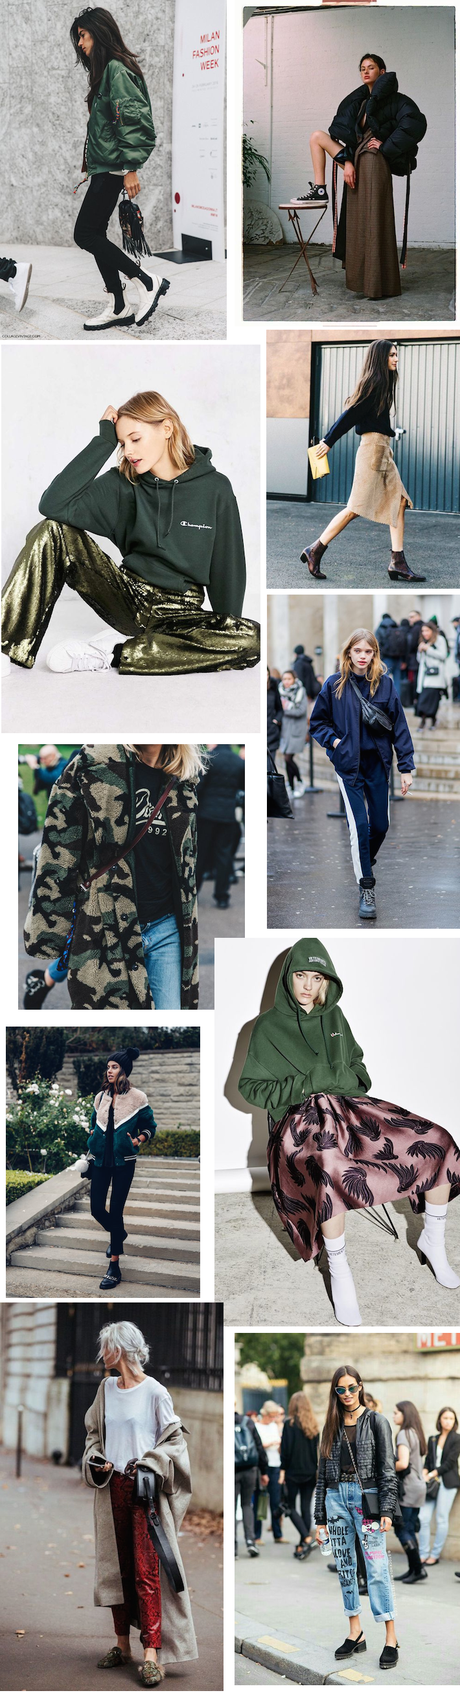 winter outfit street style editorial inspiration what to wear 2016 2017 fall